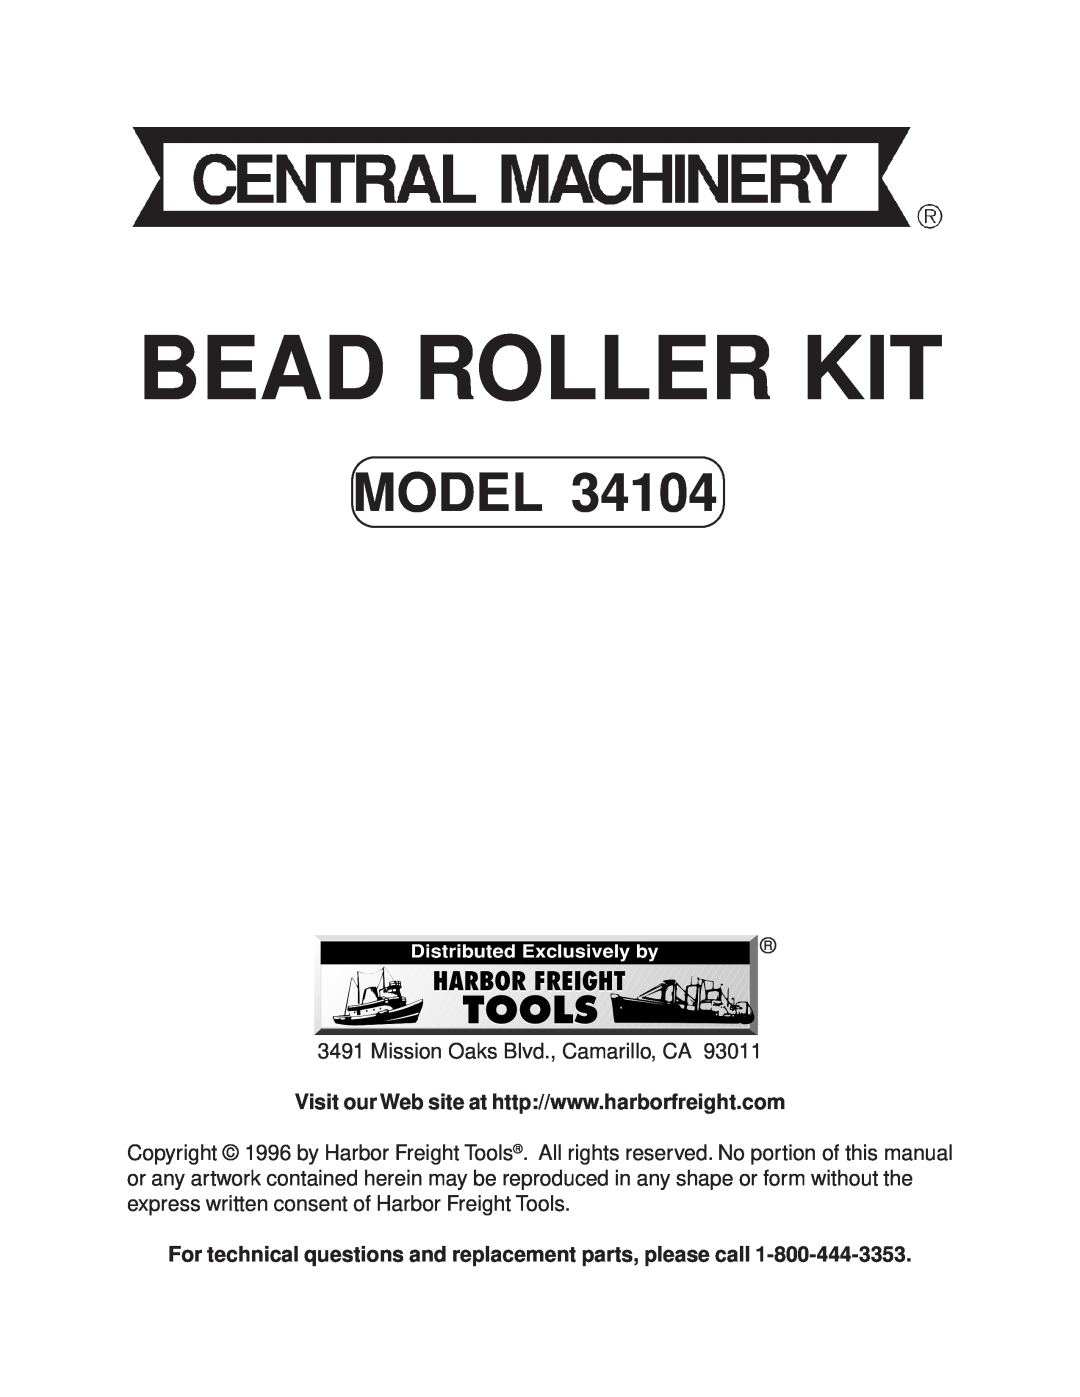 Harbor Freight Tools 34104 manual For technical questions and replacement parts, please call, Bead Roller Kit, Model 